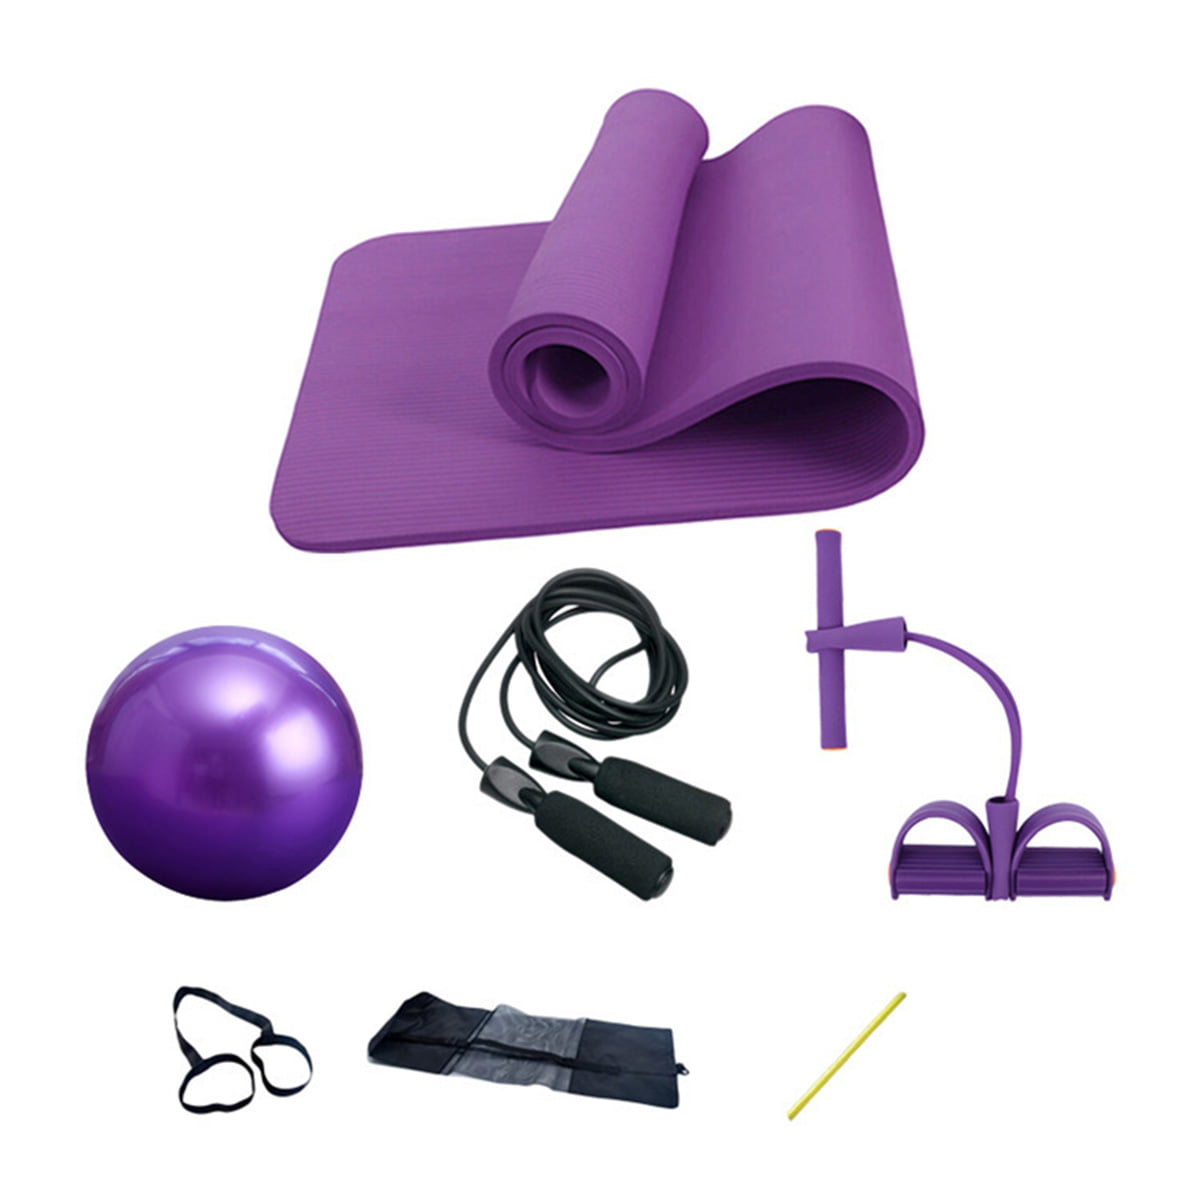 7Pcs Yoga Mat Set Pedal Tension Rope Pilate Ball Exercise Fitness Gym Workou 